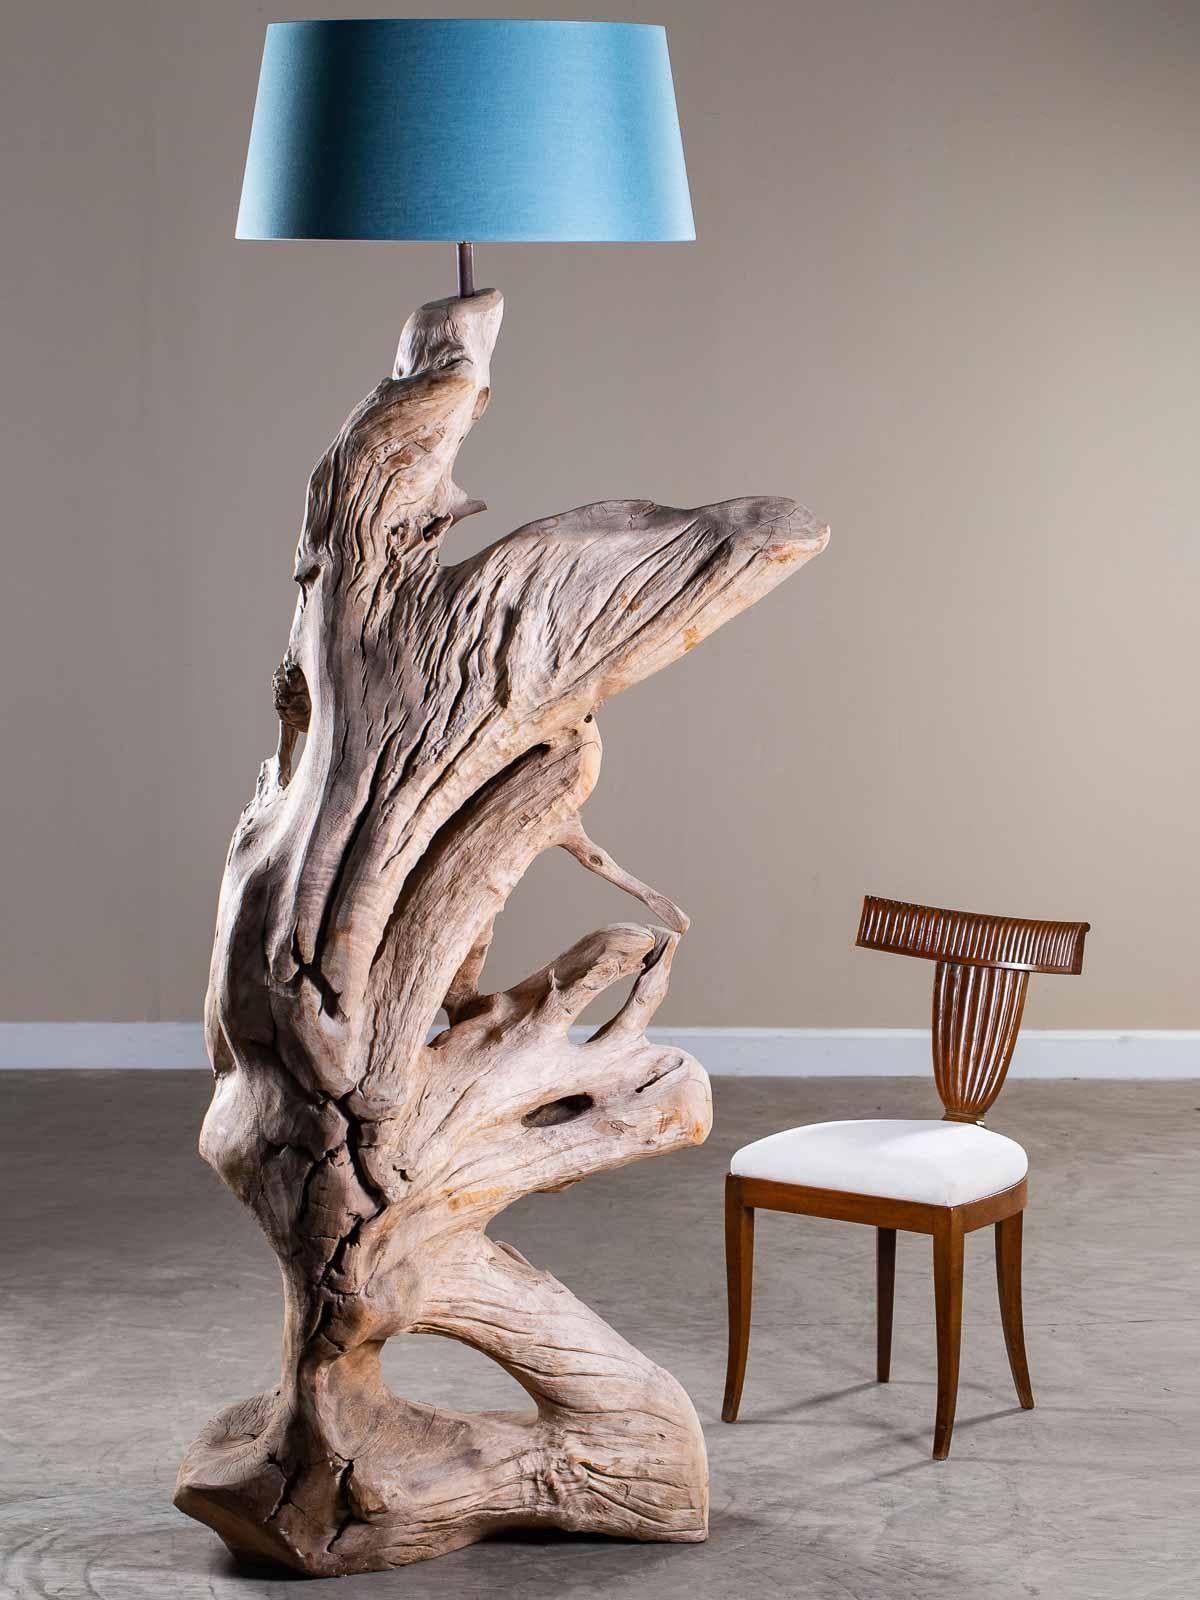 Incredible organic modern driftwood floor lamp of grand scale crafted entirely by nature. Harvested from the shores of Southeast Asia this one of a kind floor lamp exhibits all the natural signs of having been tumbled in the ocean. The play of light